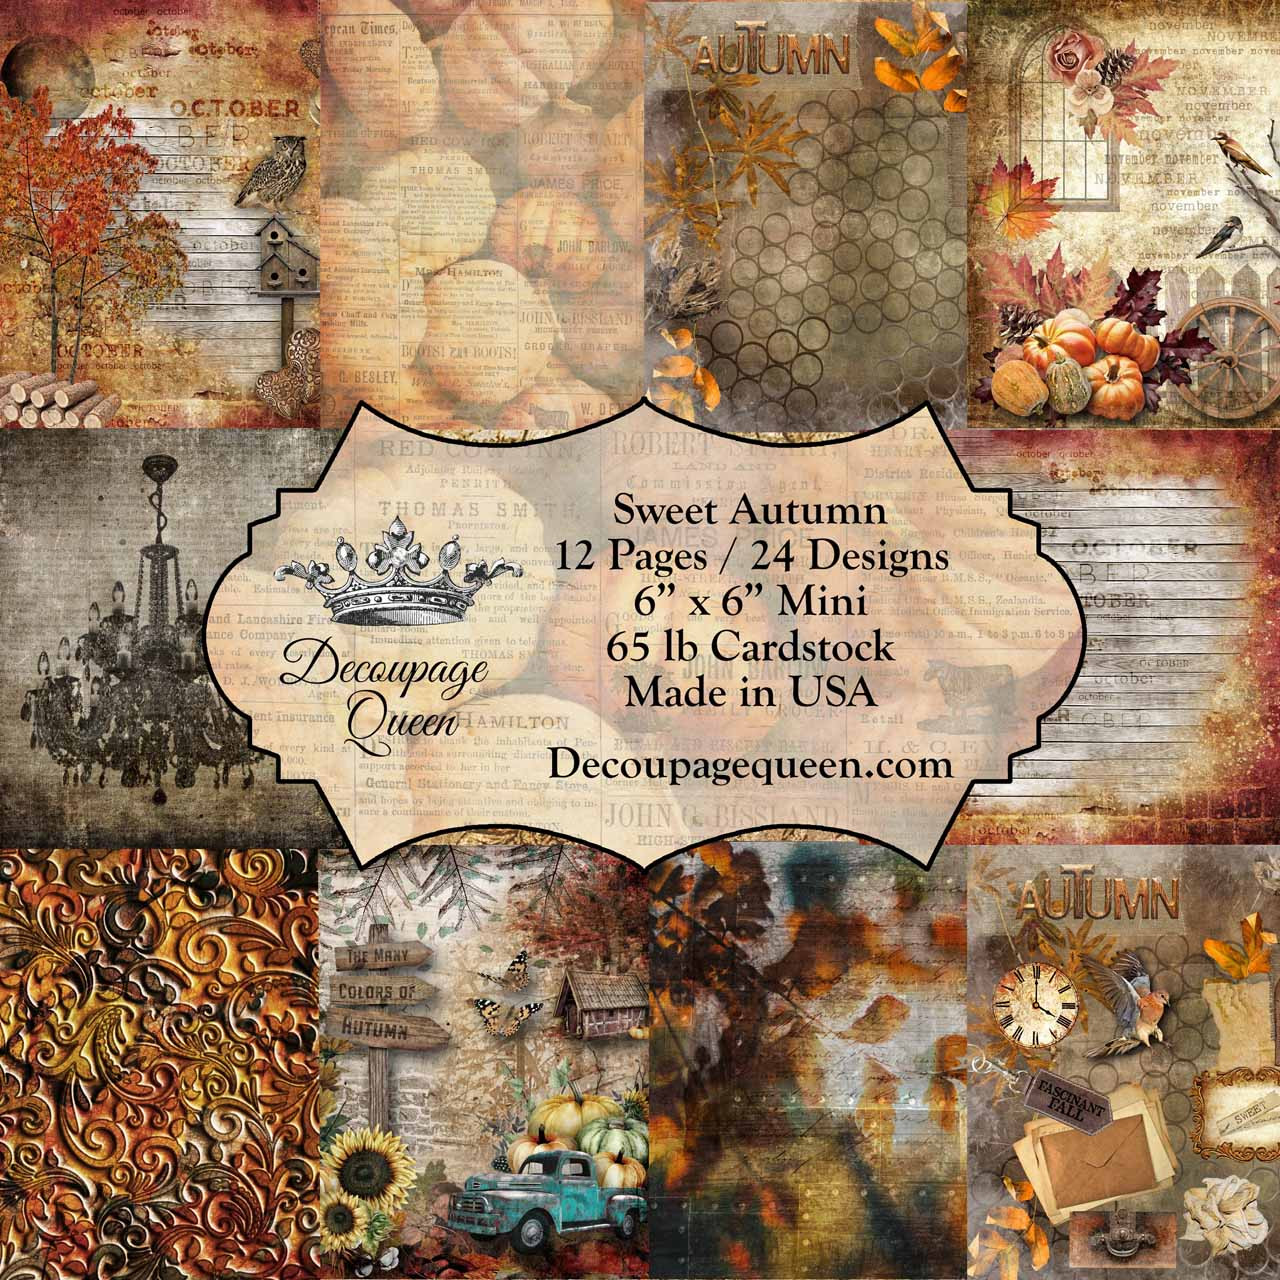 20 Titles for Autumn Scrapbook Pages – Scrap Booking